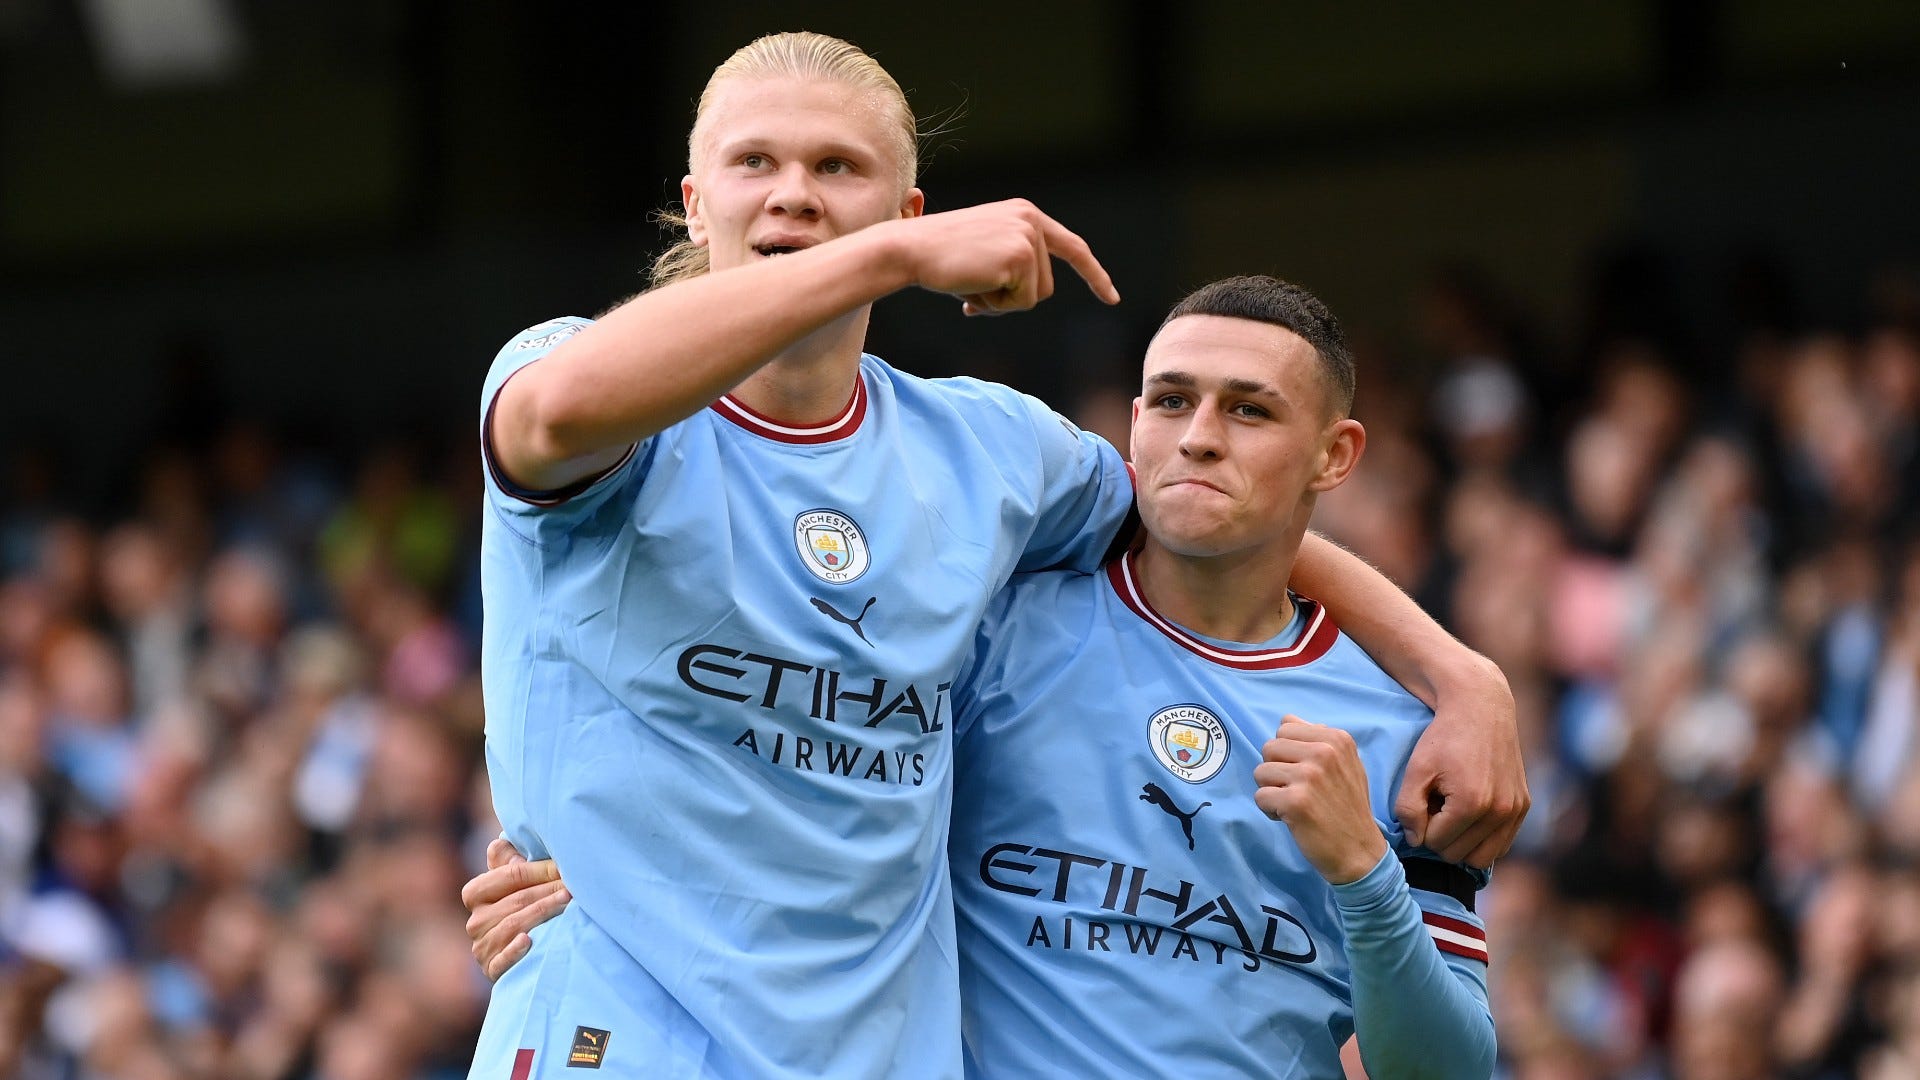 Southampton vs Manchester City Live stream, TV channel, kick-off time and where to watch Goal US